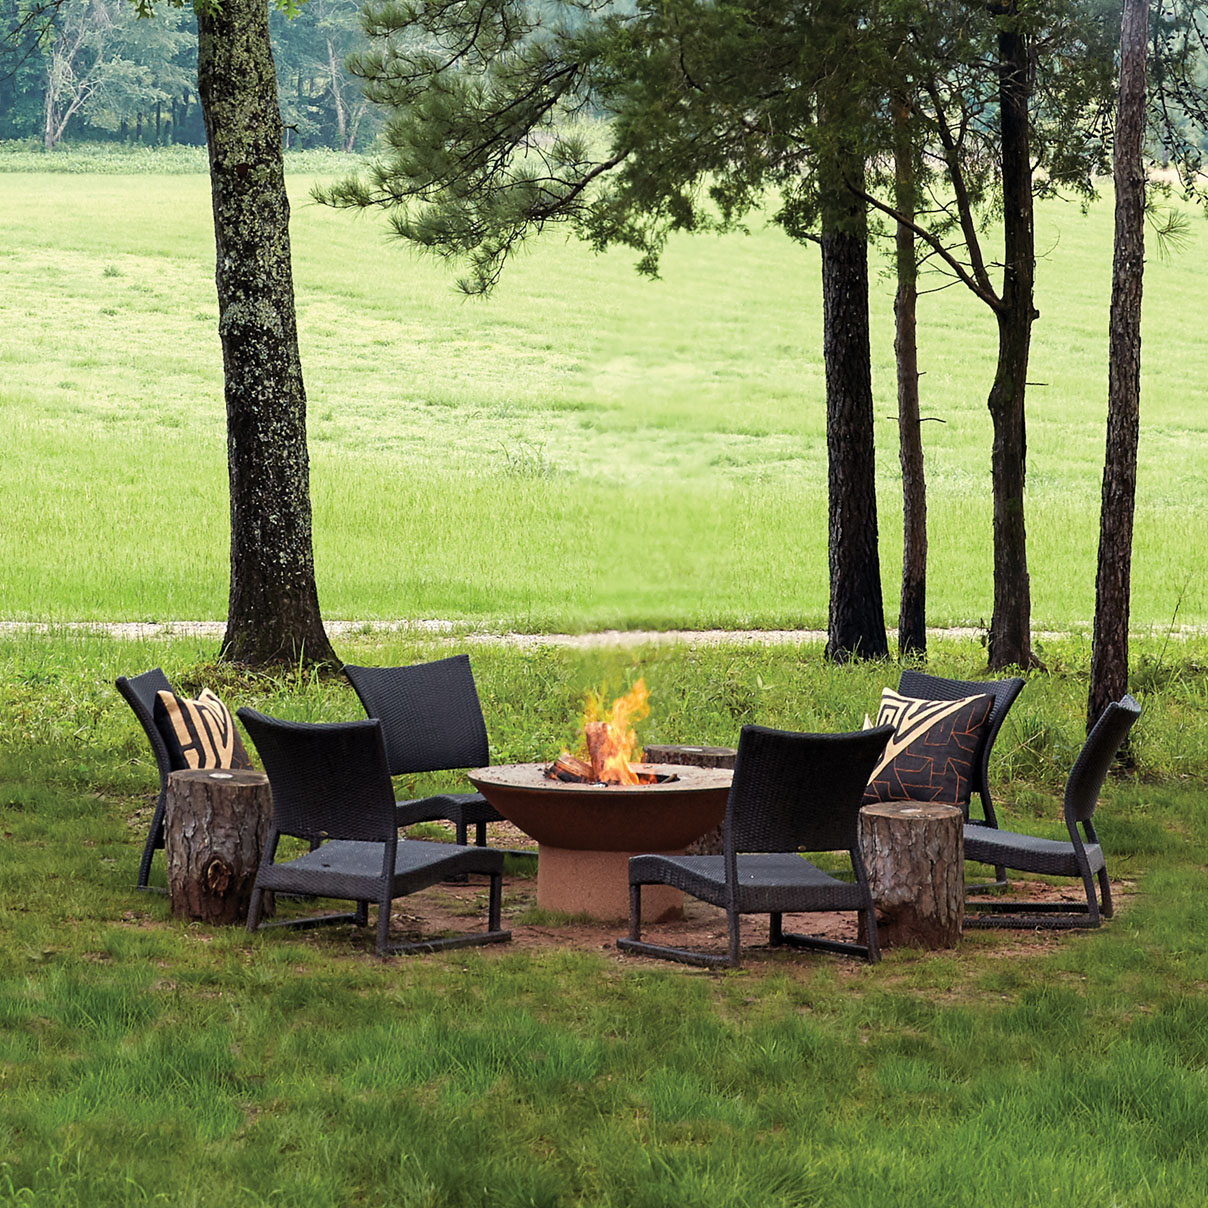 Arteflame firepit and chairs